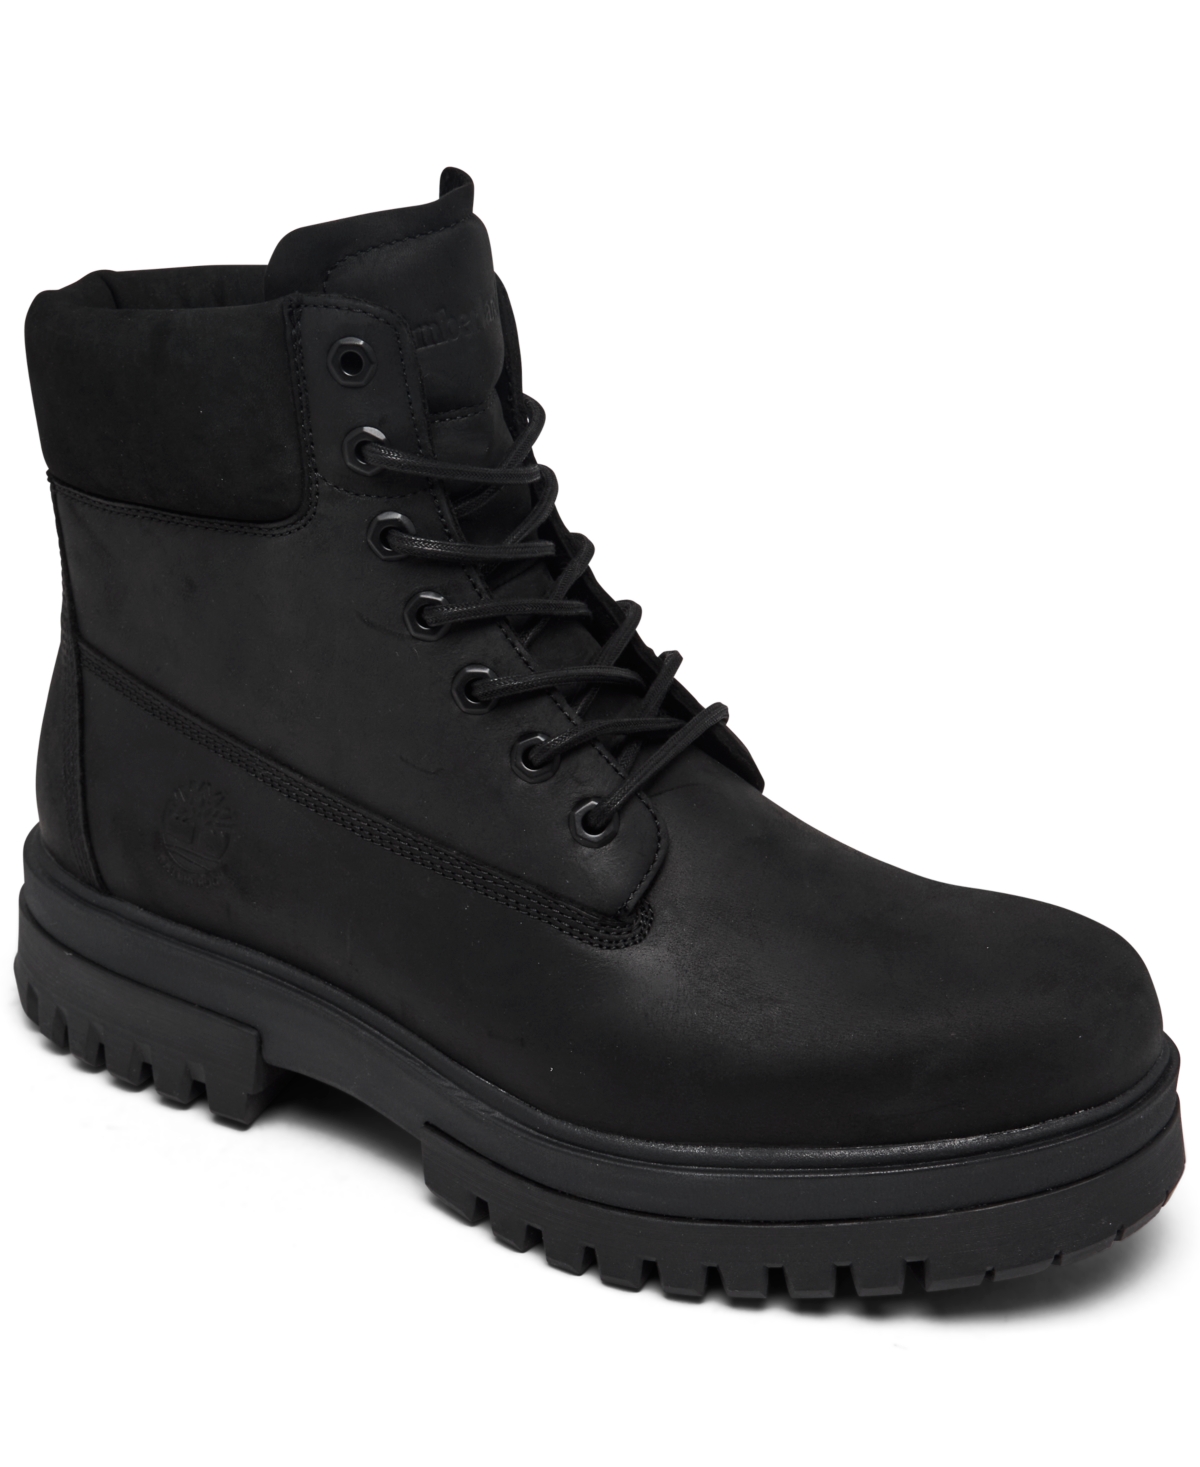 Timberland Men's Arbor Road 6" Water-resistant Boots From Finish Line In Jet Black